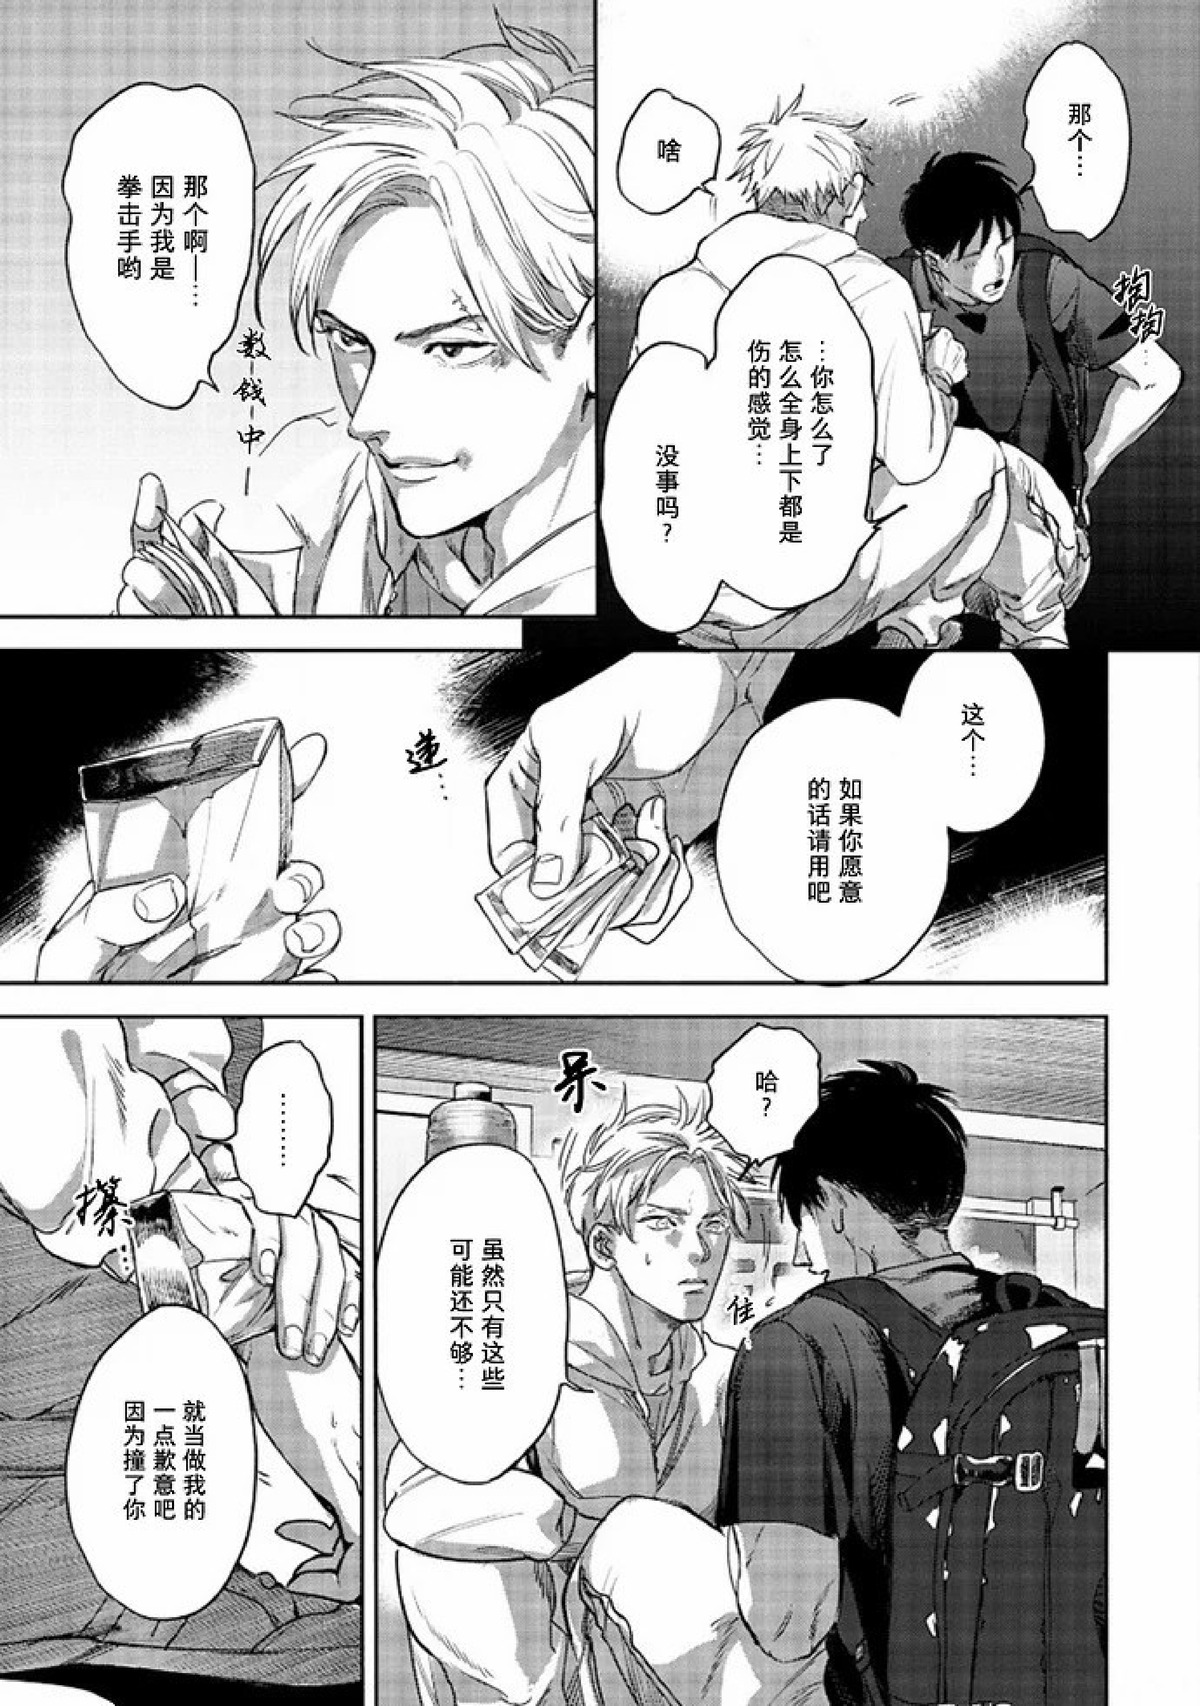 【Two sides of the same coin[耽美]】漫画-（上卷01-02）章节漫画下拉式图片-37.jpg